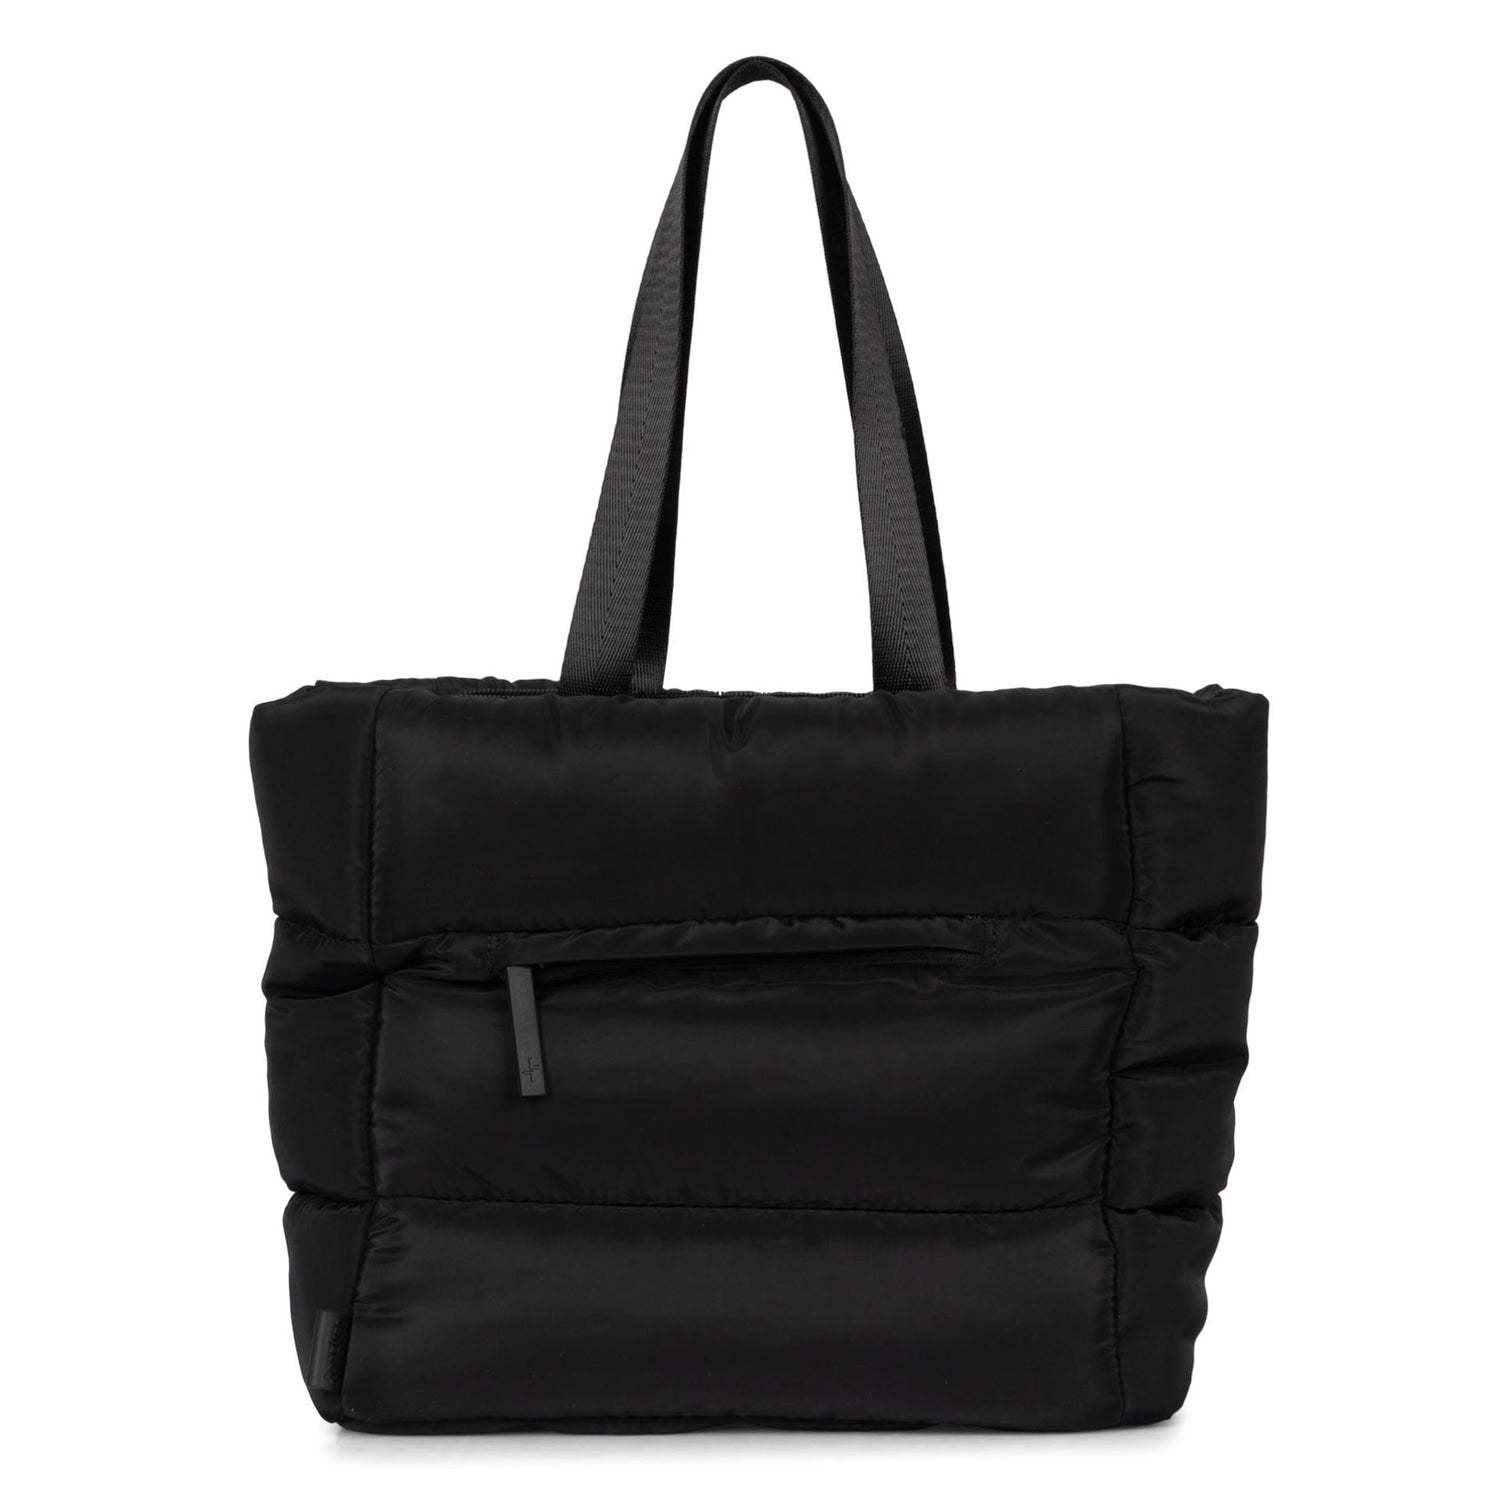 Frontside of a black lunch tote bag called Urban Quilted designed by Tracker on a white background, showcasing its long top handles and exterior zipper.